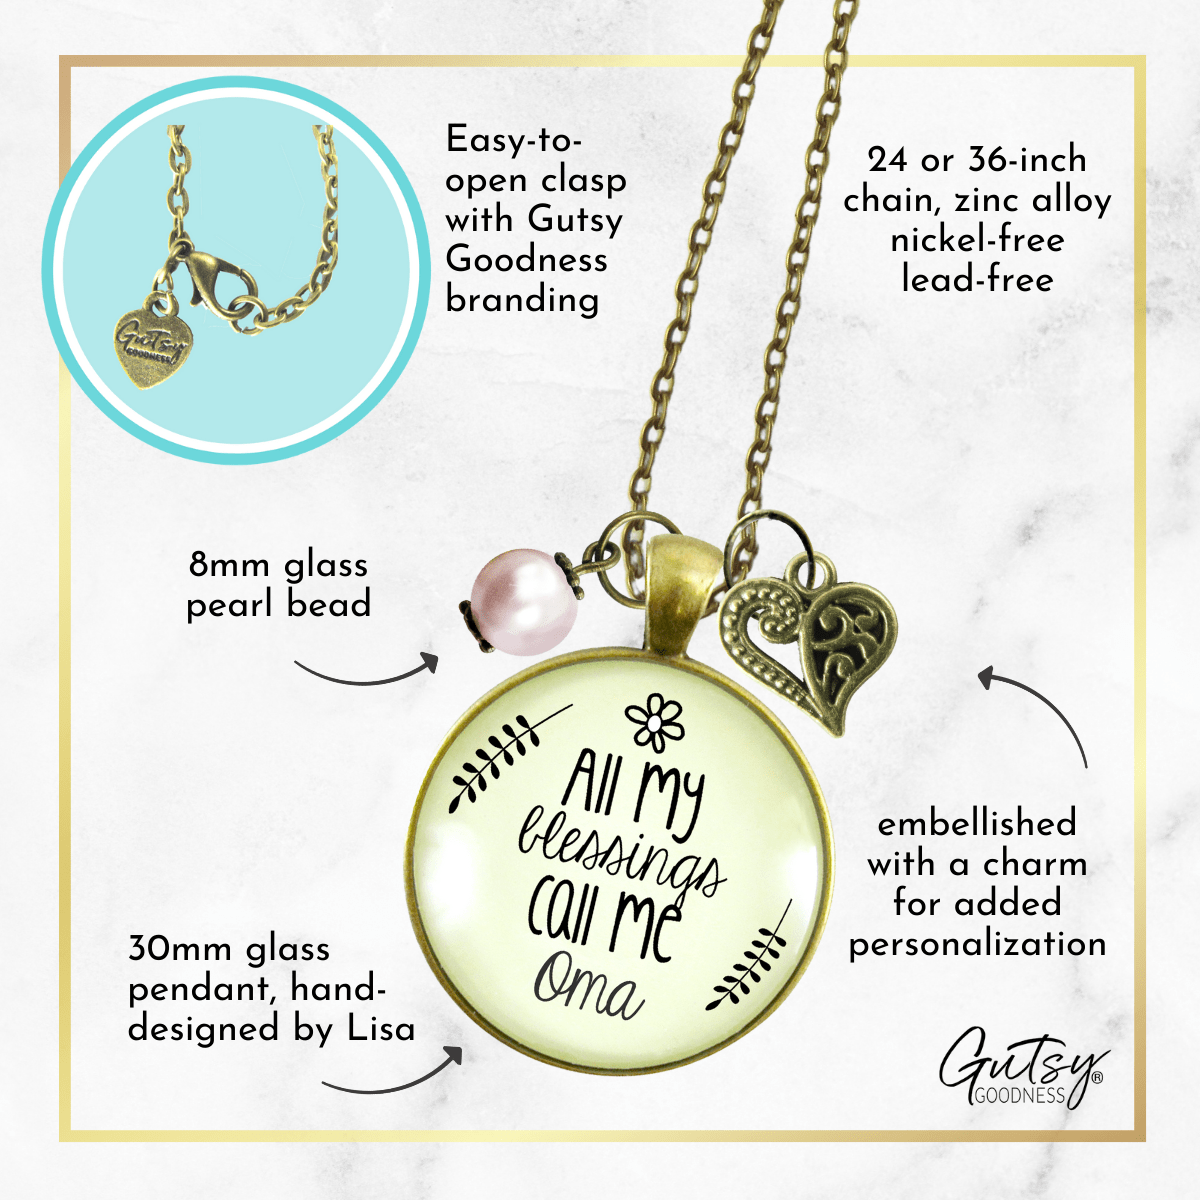 Gutsy Goodness Oma Necklace All My Blessings German Grandma Womens Family Gift Jewelry - Gutsy Goodness Handmade Jewelry;Oma Necklace All My Blessings German Grandma Womens Family Gift Jewelry - Gutsy Goodness Handmade Jewelry Gifts